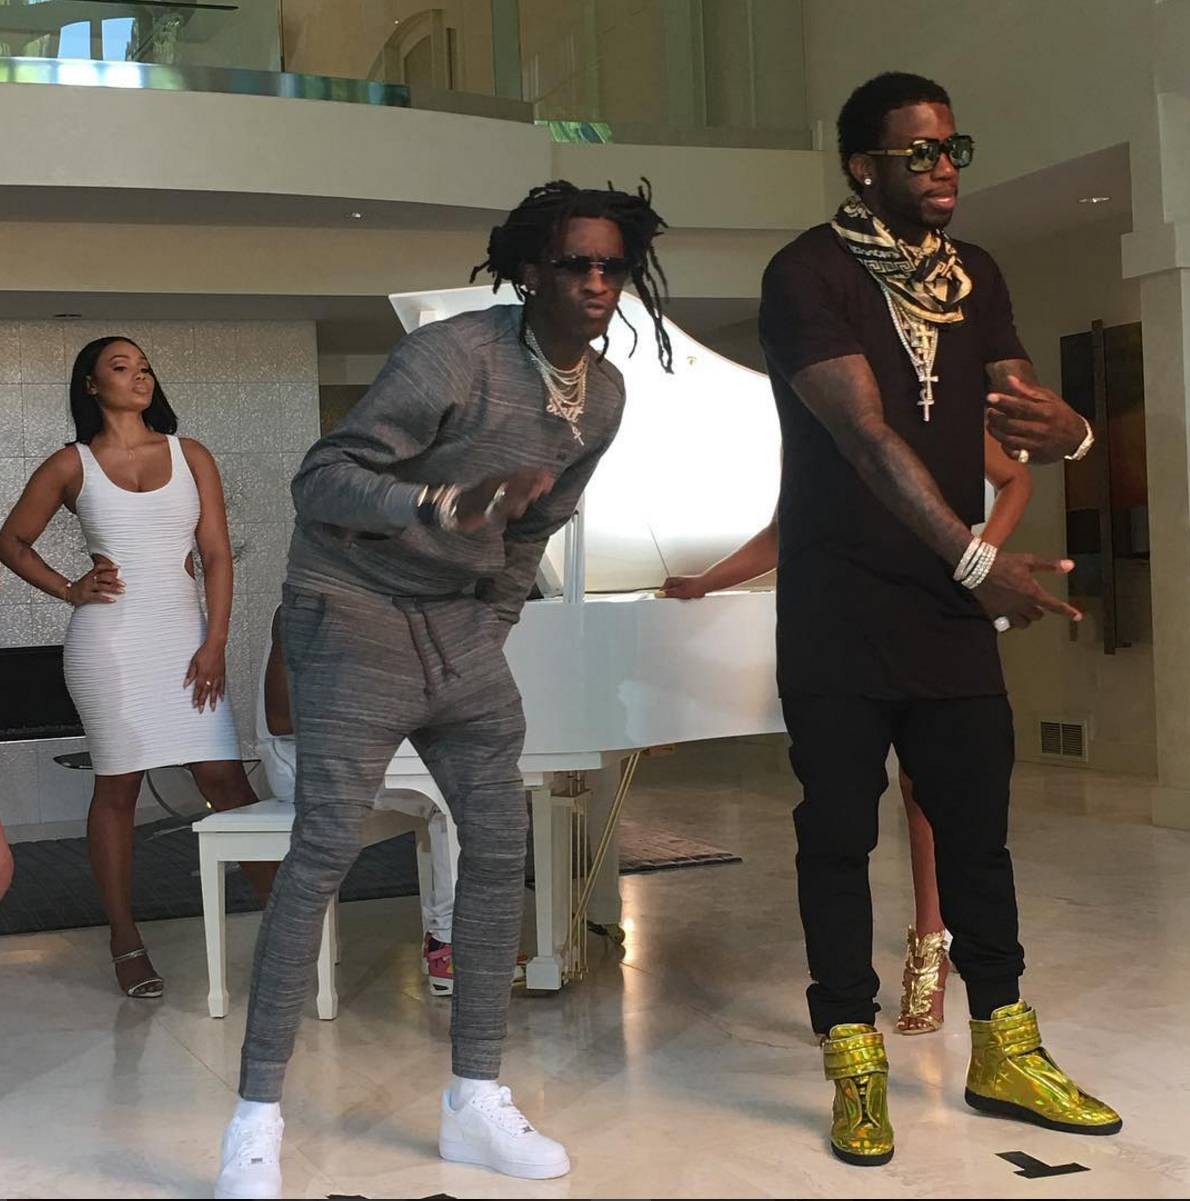 Gucci Mane and Young Thug Are Reunited and It Feels So Good | News | BET